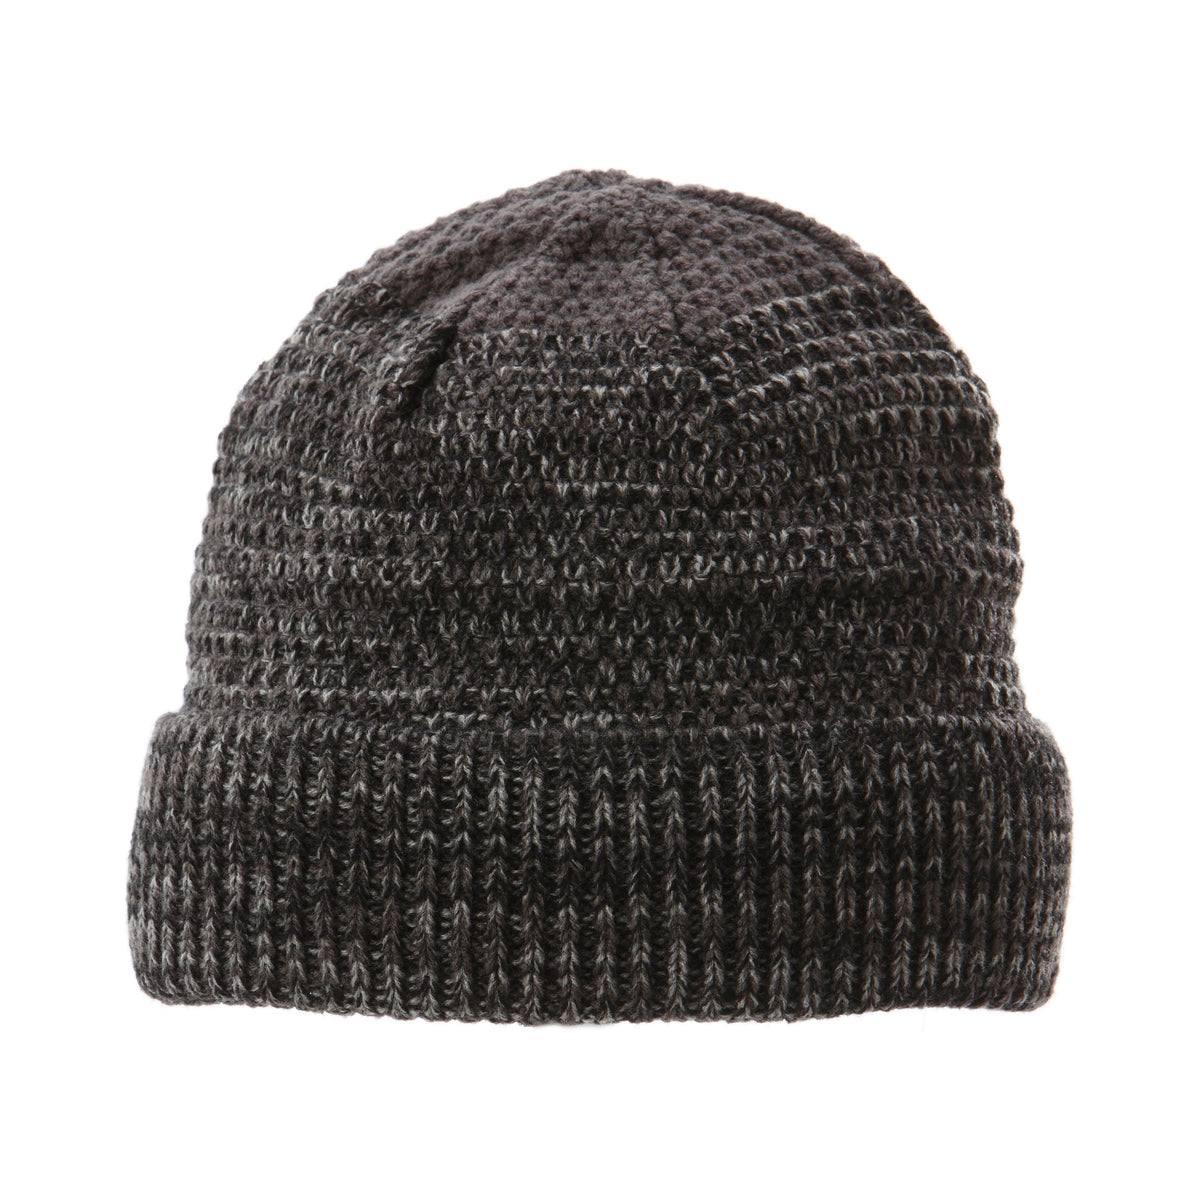 made Graham Screamer super A comfy Gear beanie - use – long-lasting for